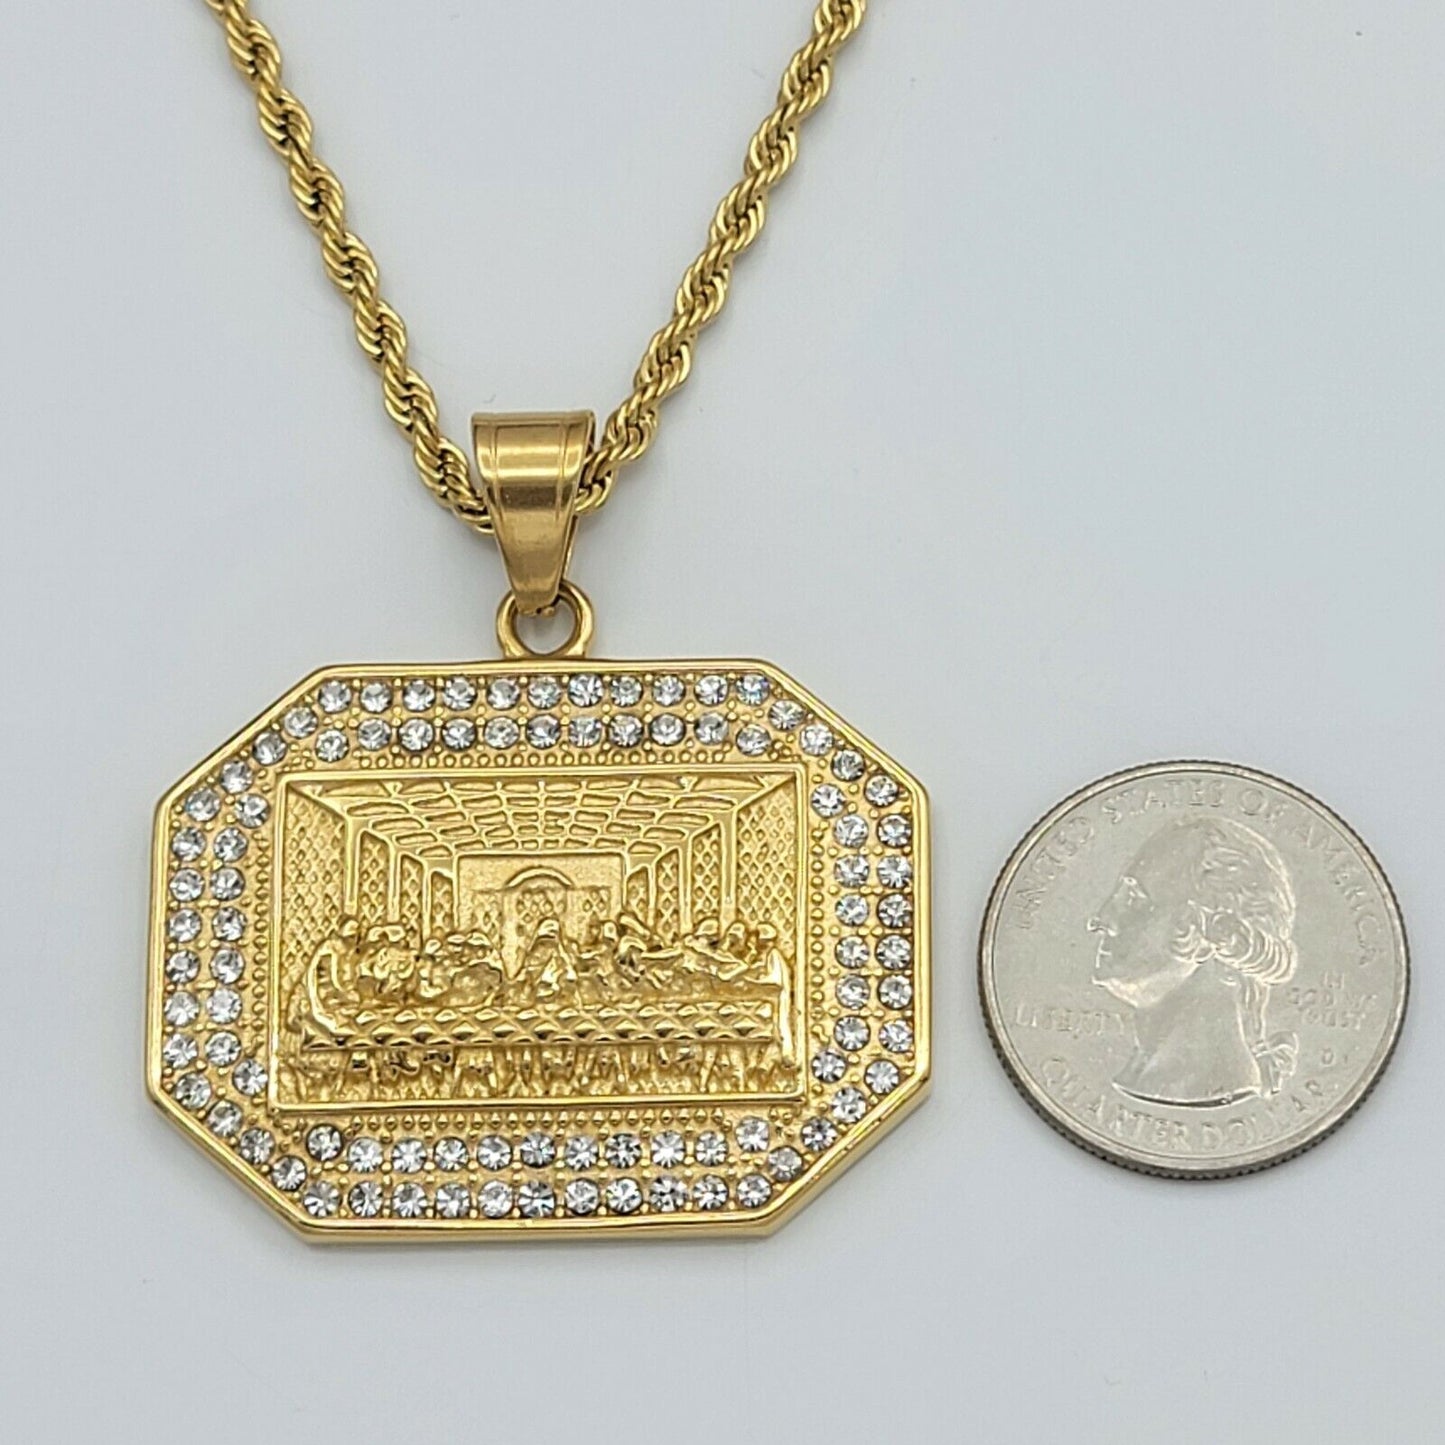 Necklaces - Stainless Steel Gold Plated. Last Supper Pendant & Chain - La Ultima Cena